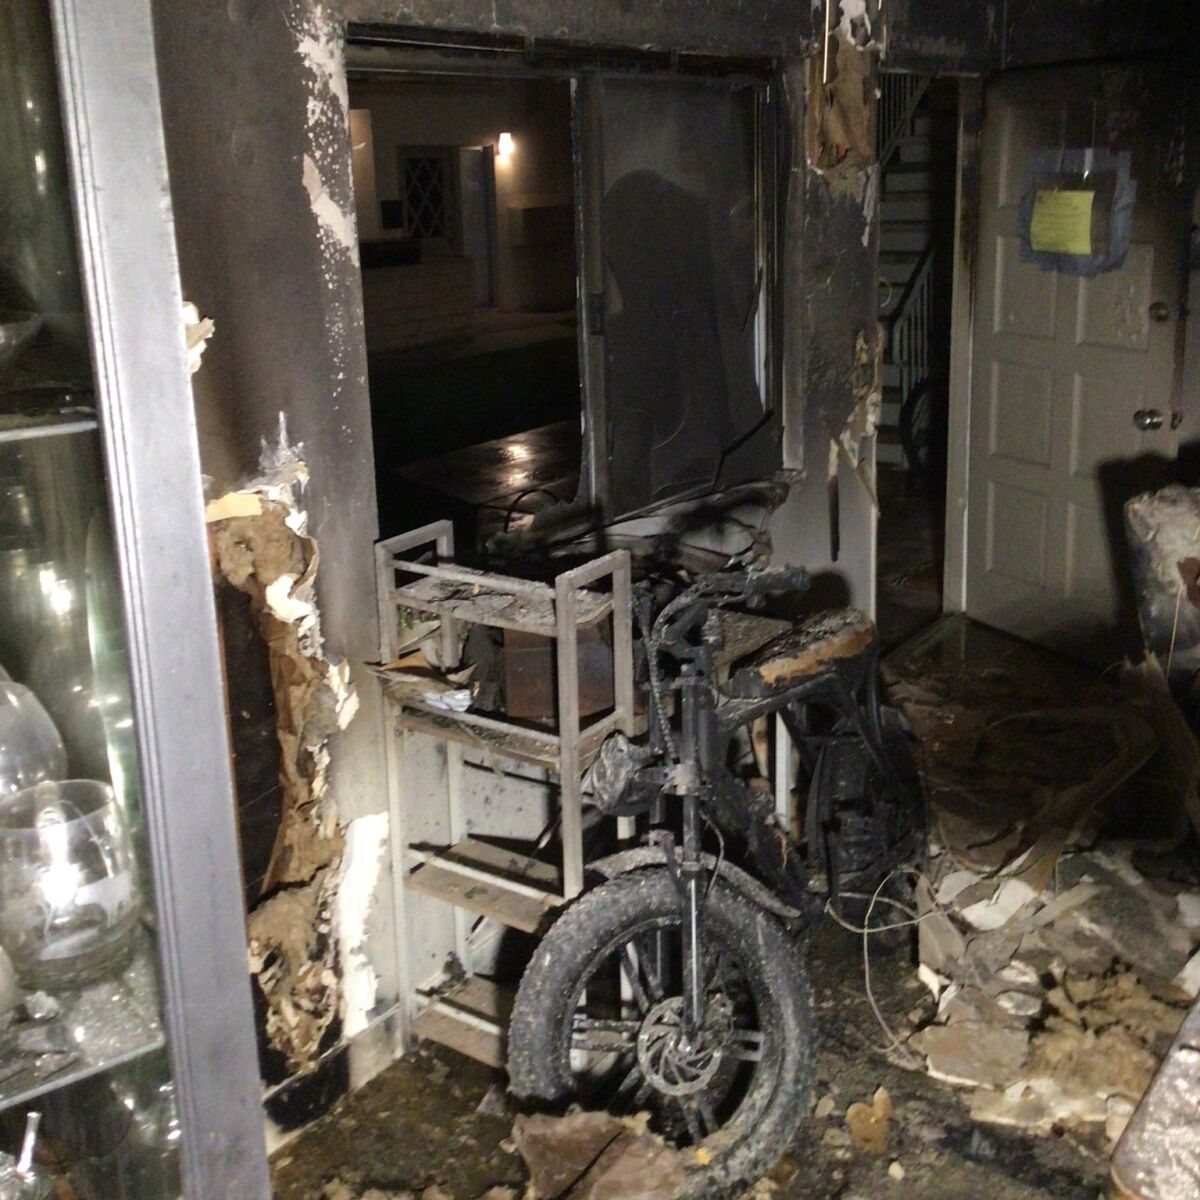 A burnt-out apartment with a blackened e-bike in the center.